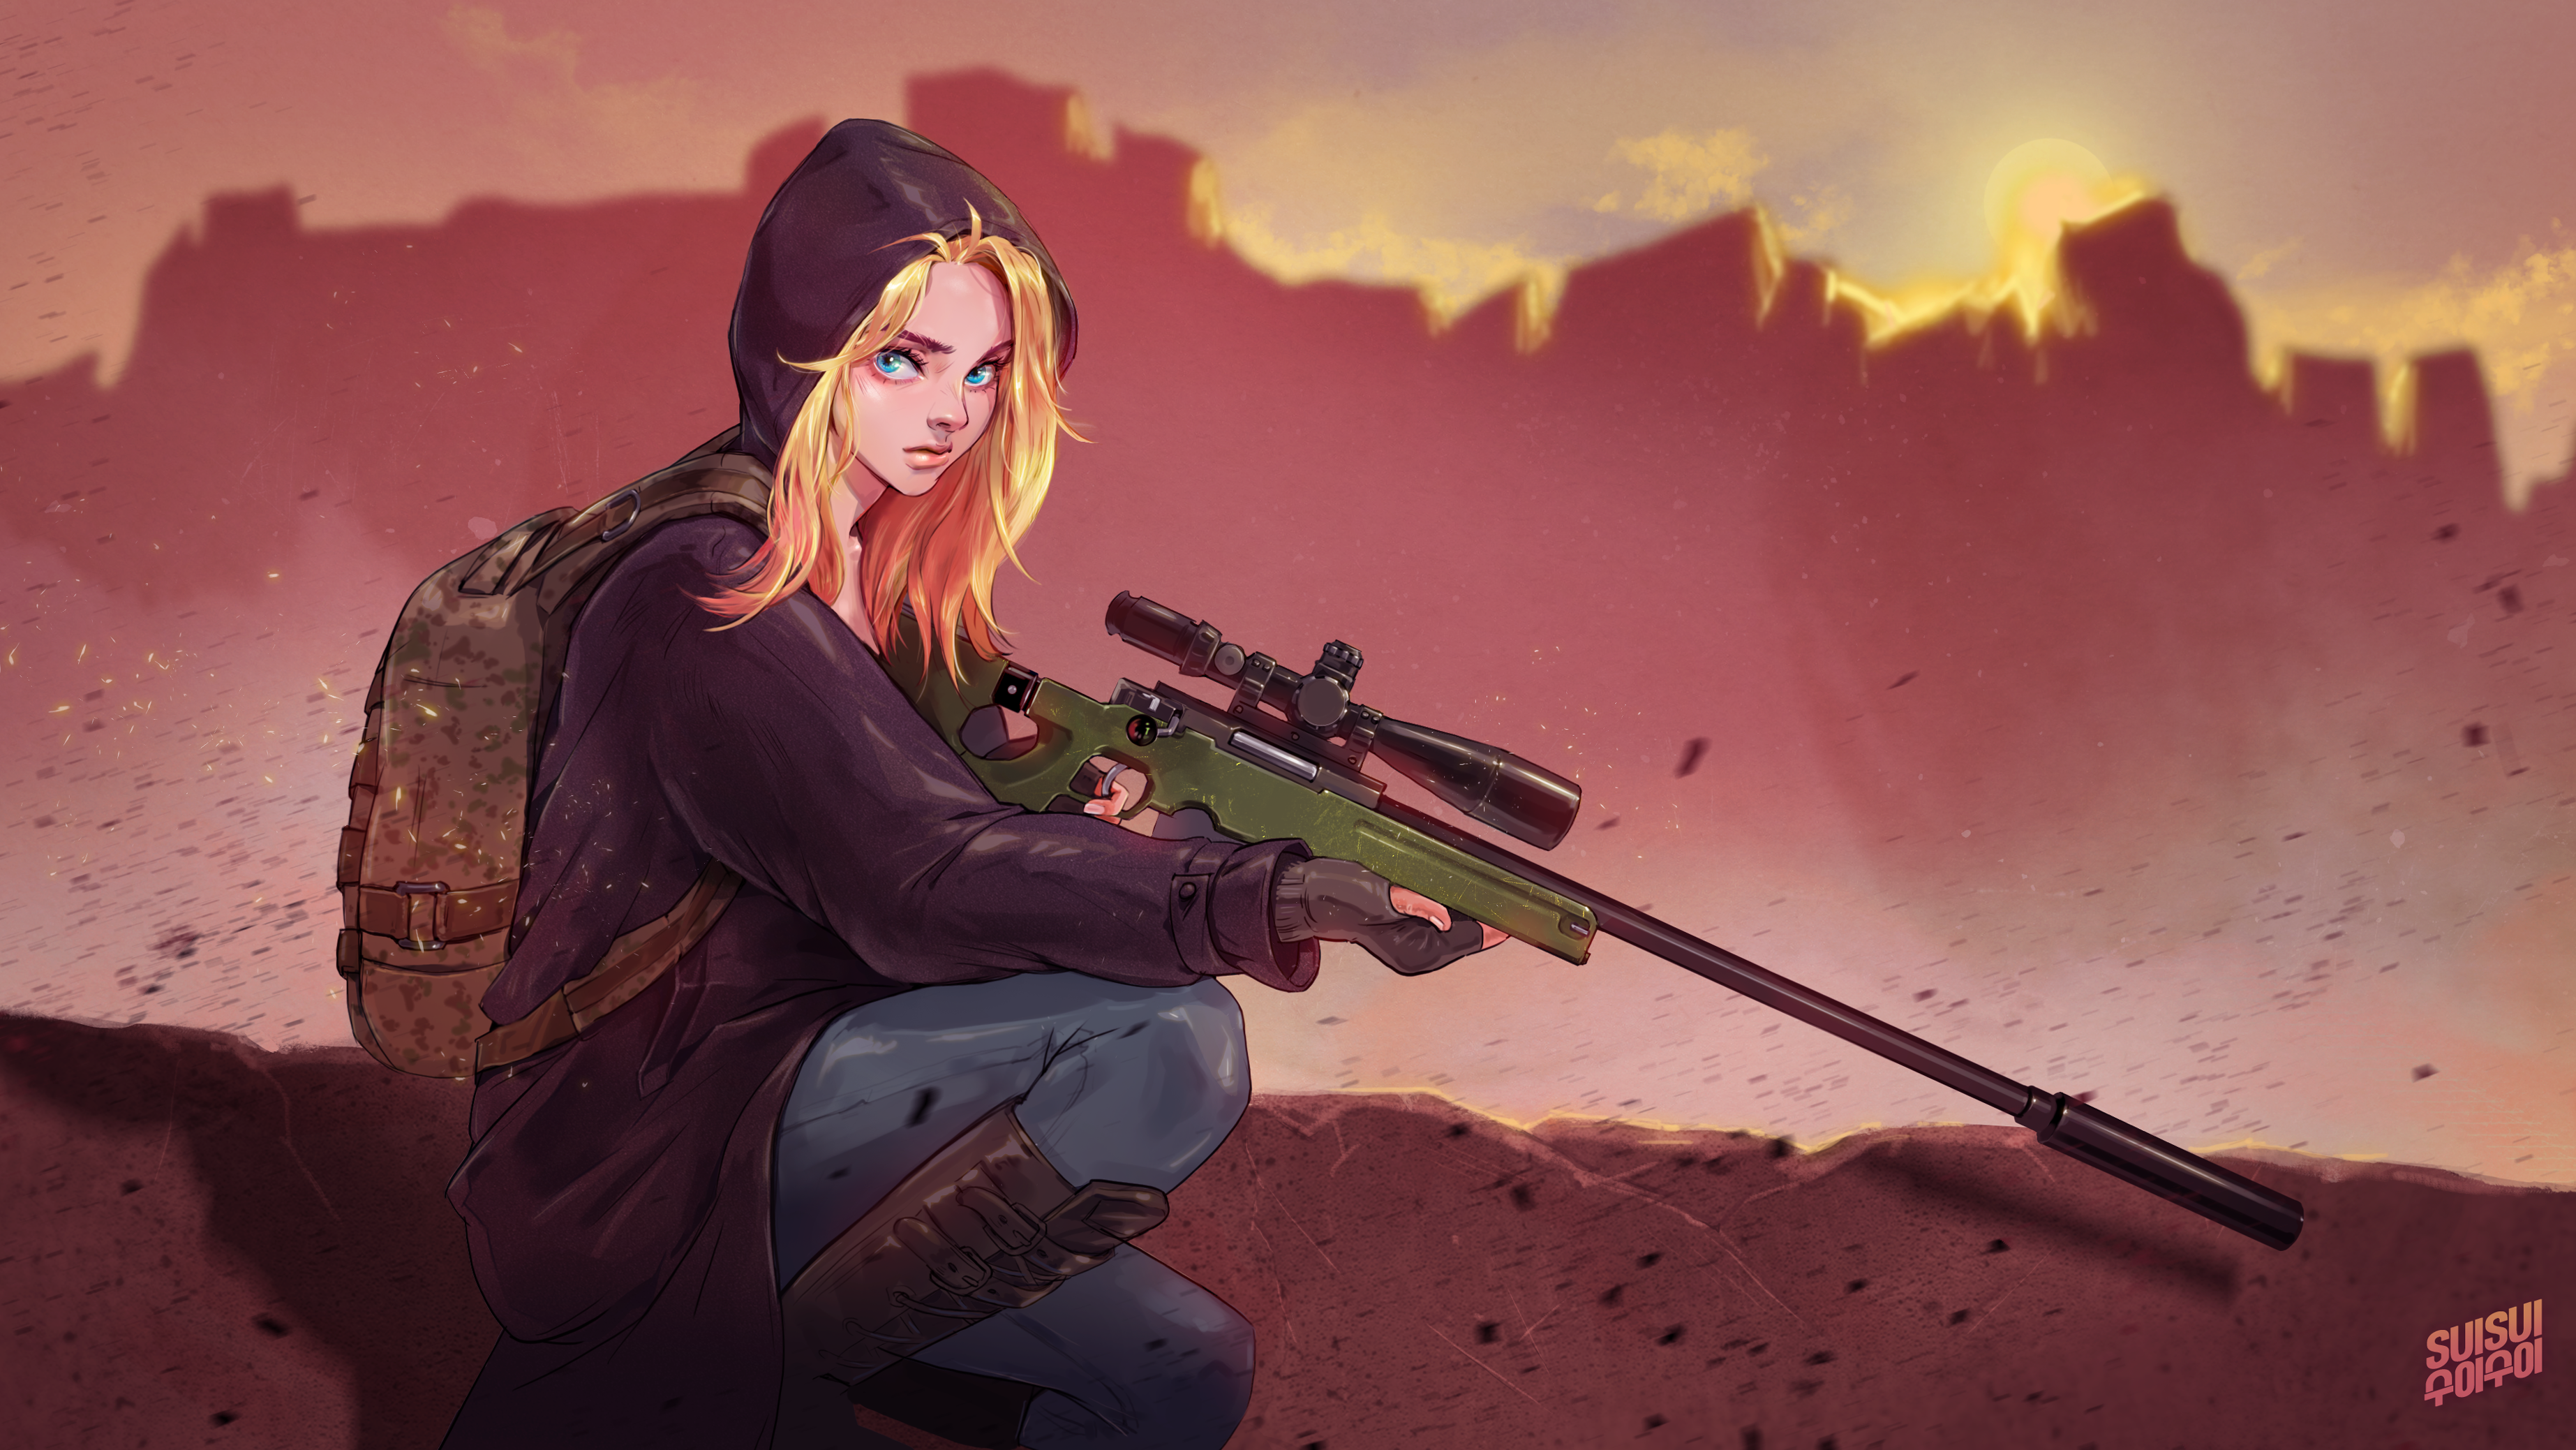 PUBG Wallpaper Engine Illustration by Hey SUISUI on